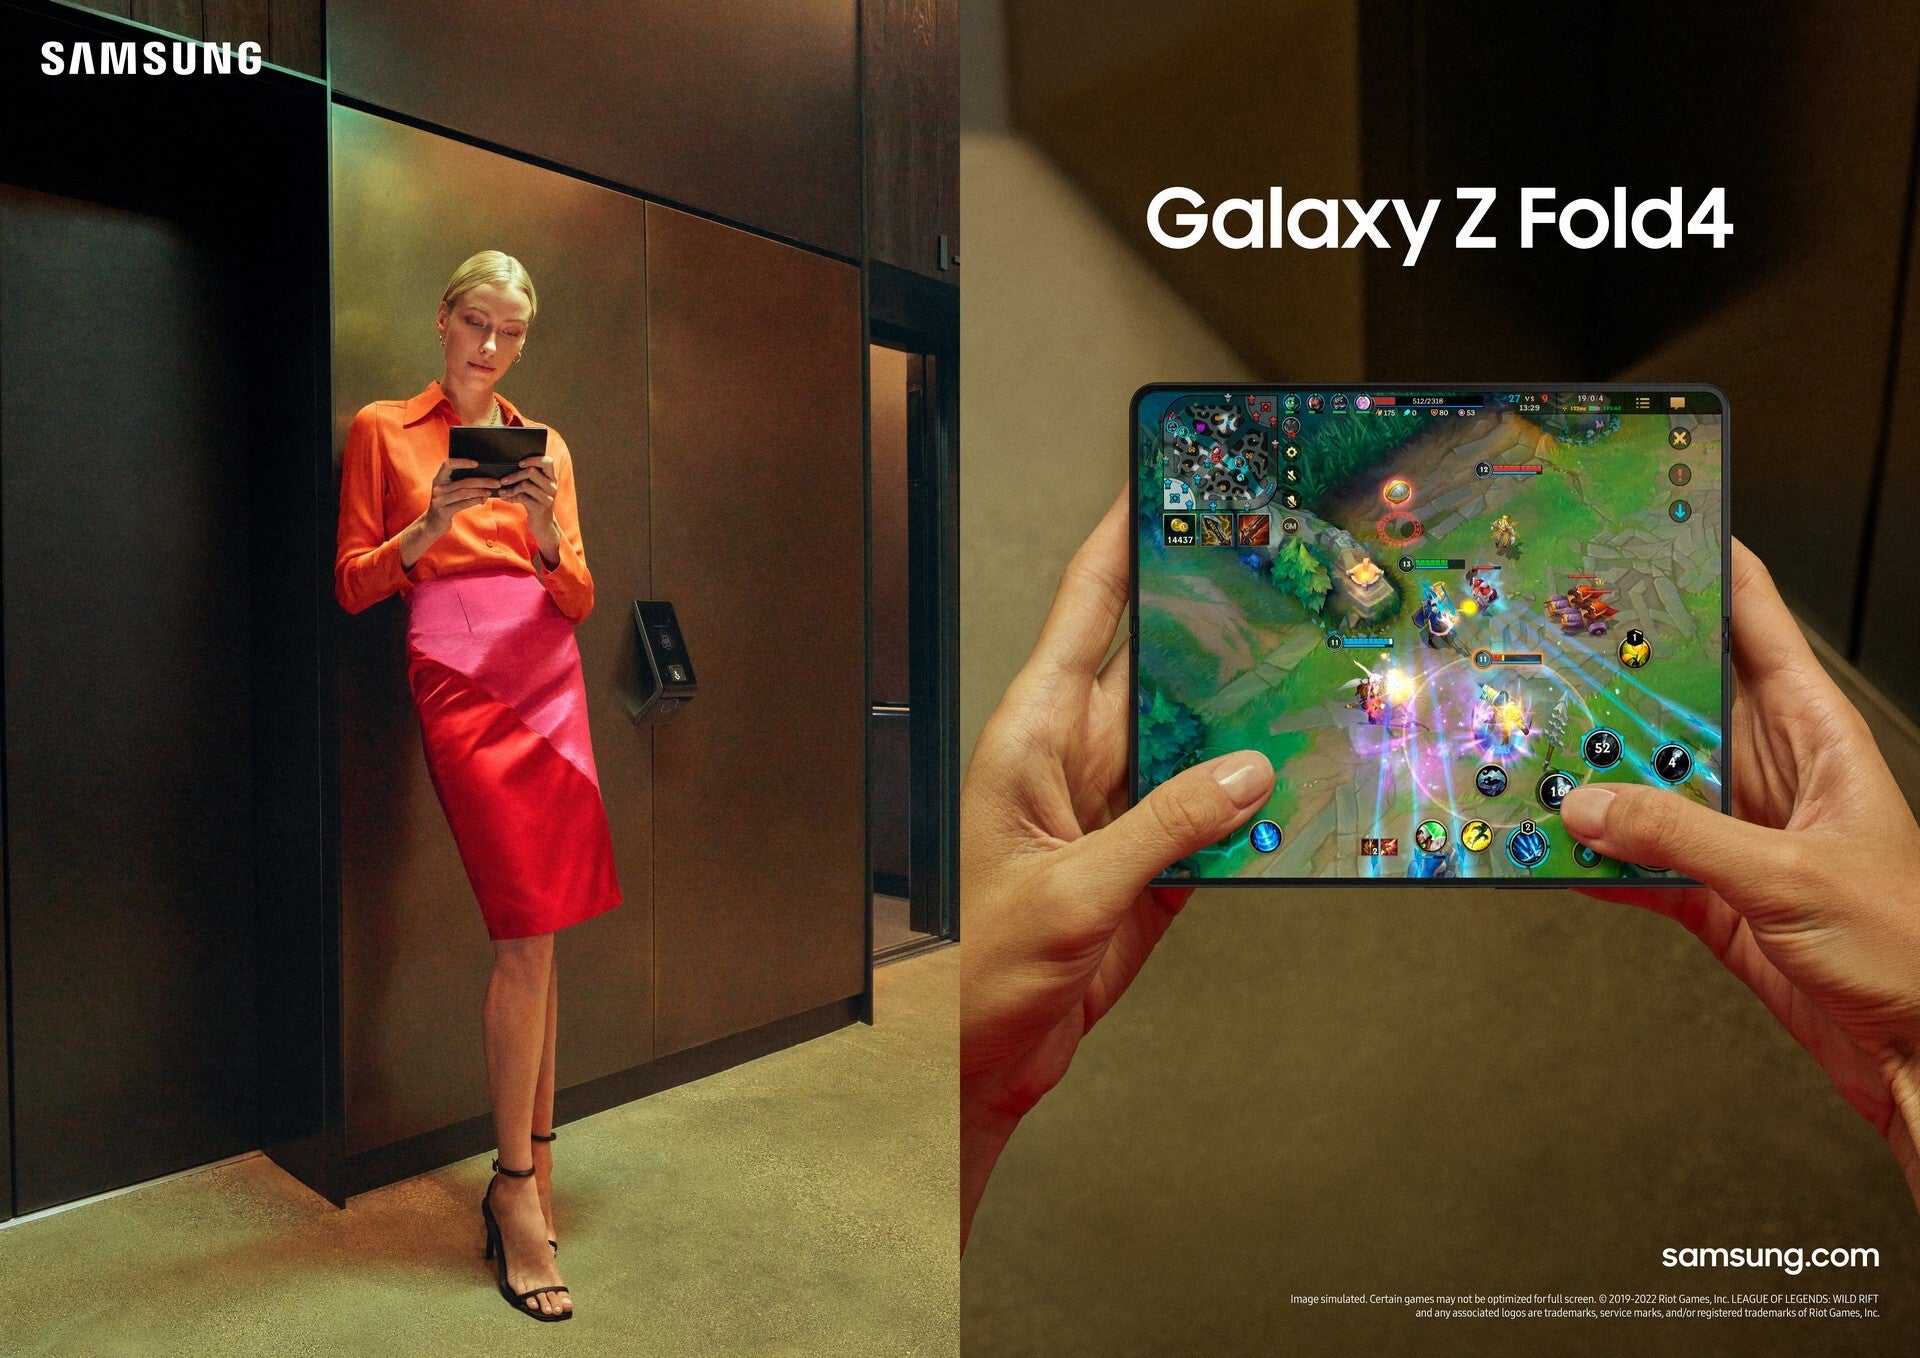 Samsung Galaxy Z Fold 4 is official: more of what makes the Fold great